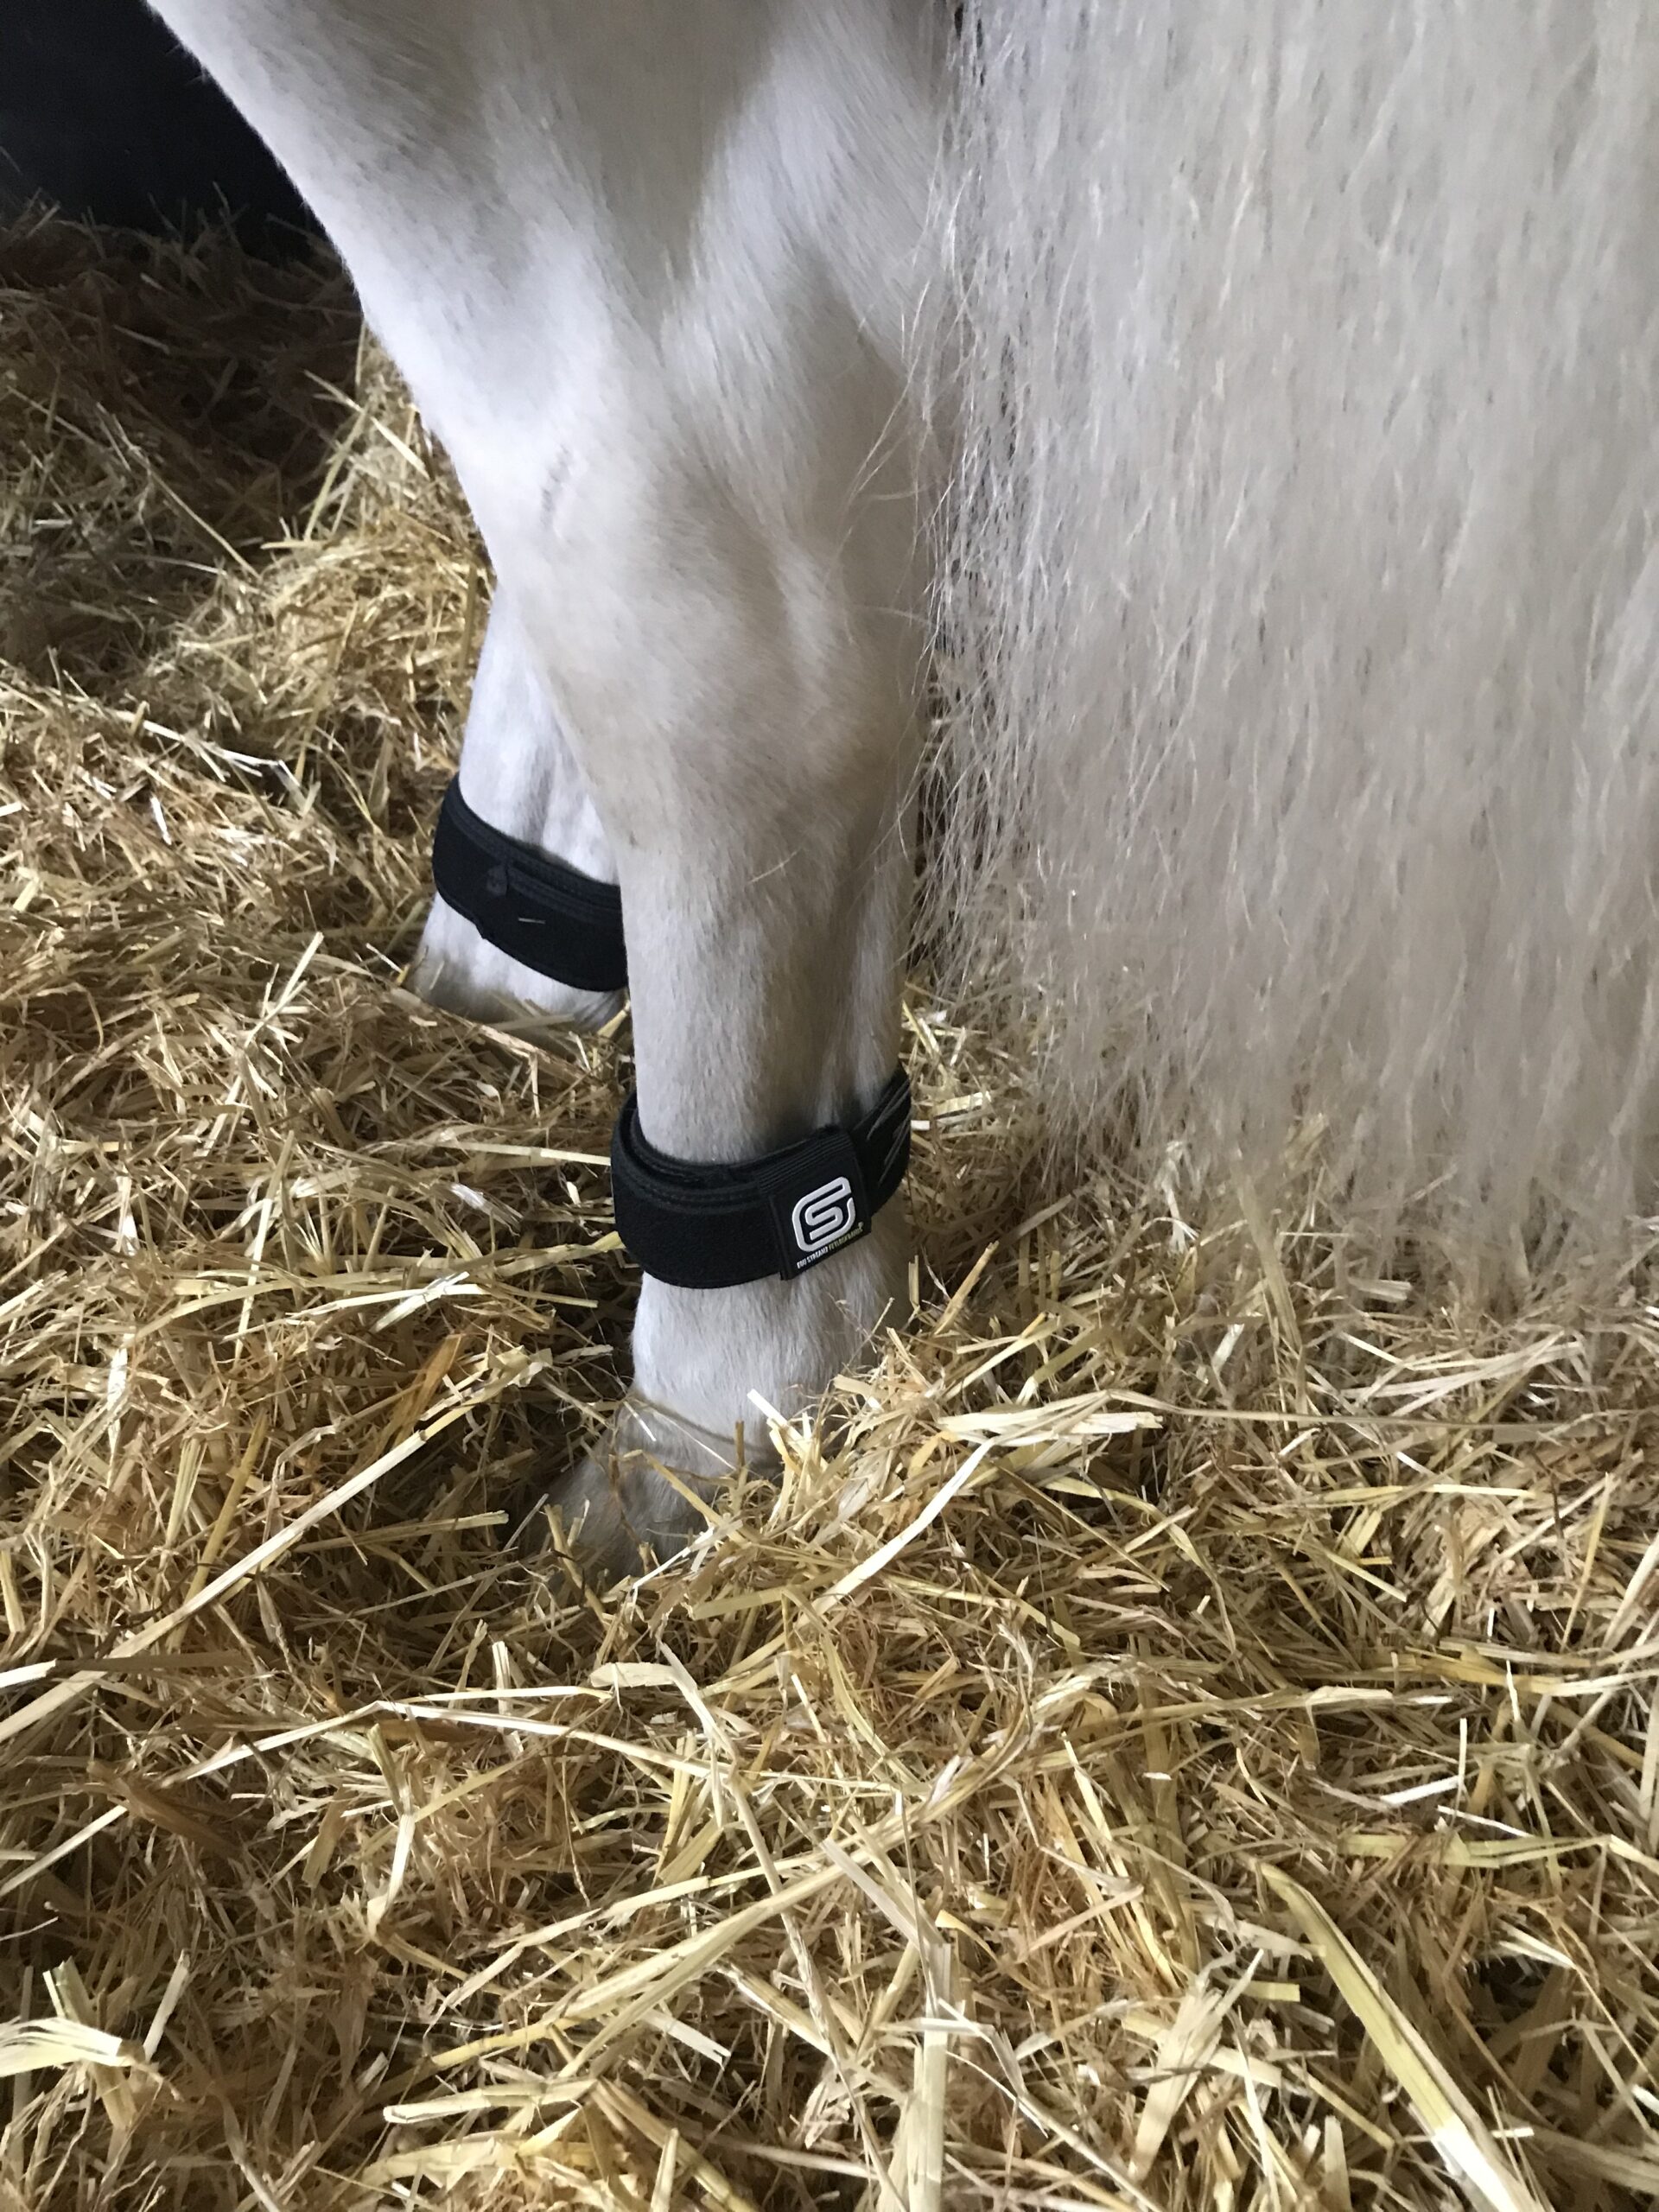 The bands can be worn above or below the fetlock joint for 8-24 hours